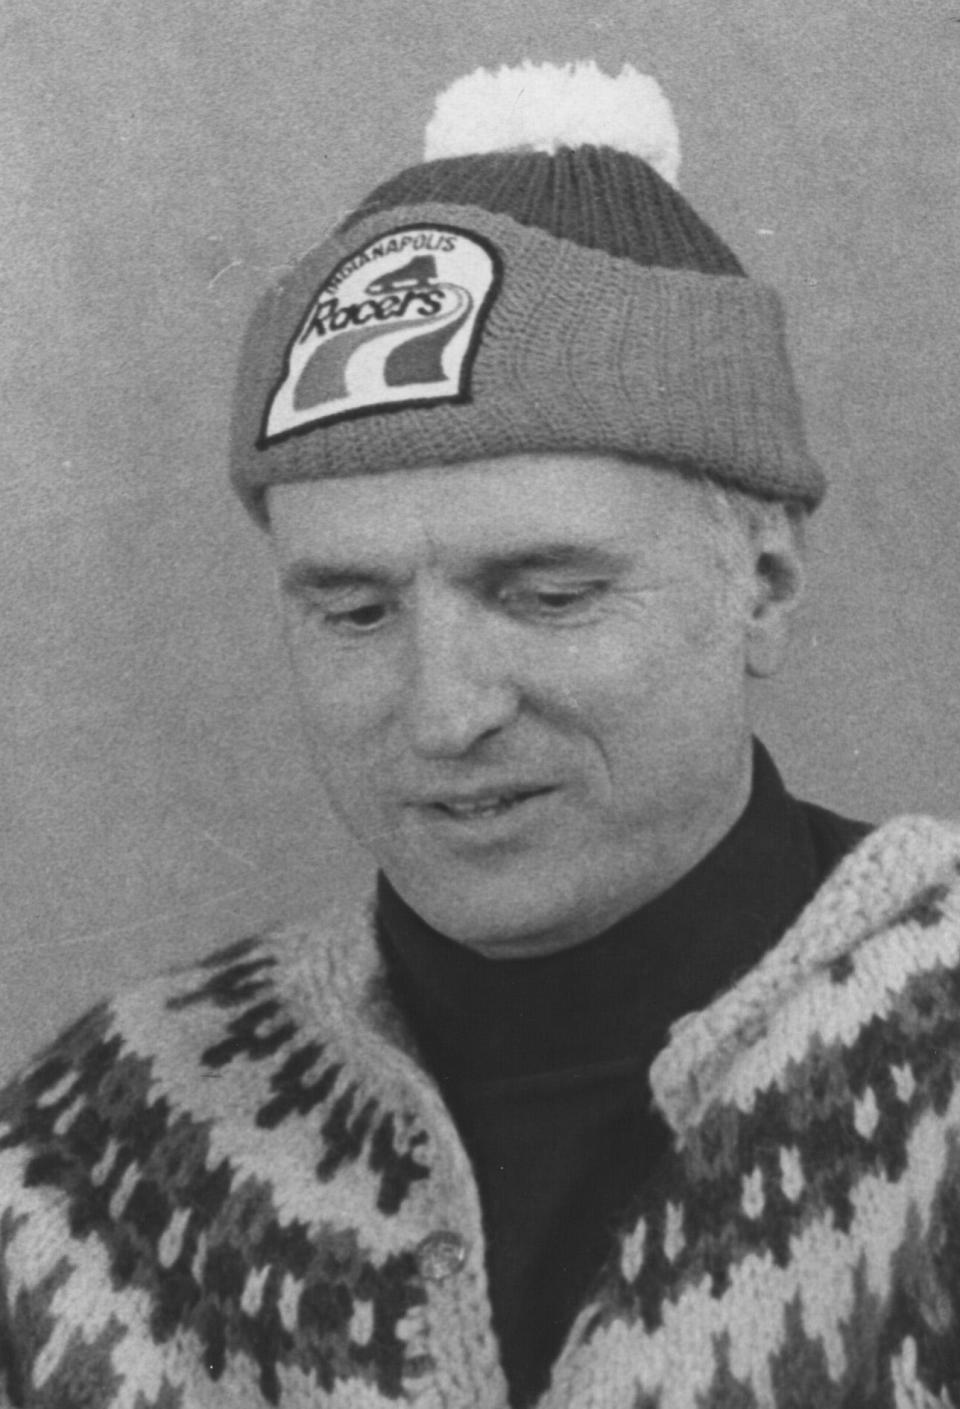 Indianapolis Mayor William Hudnut in his Indianapolis Racers hat was a common sight during the Blizzard of 1978.